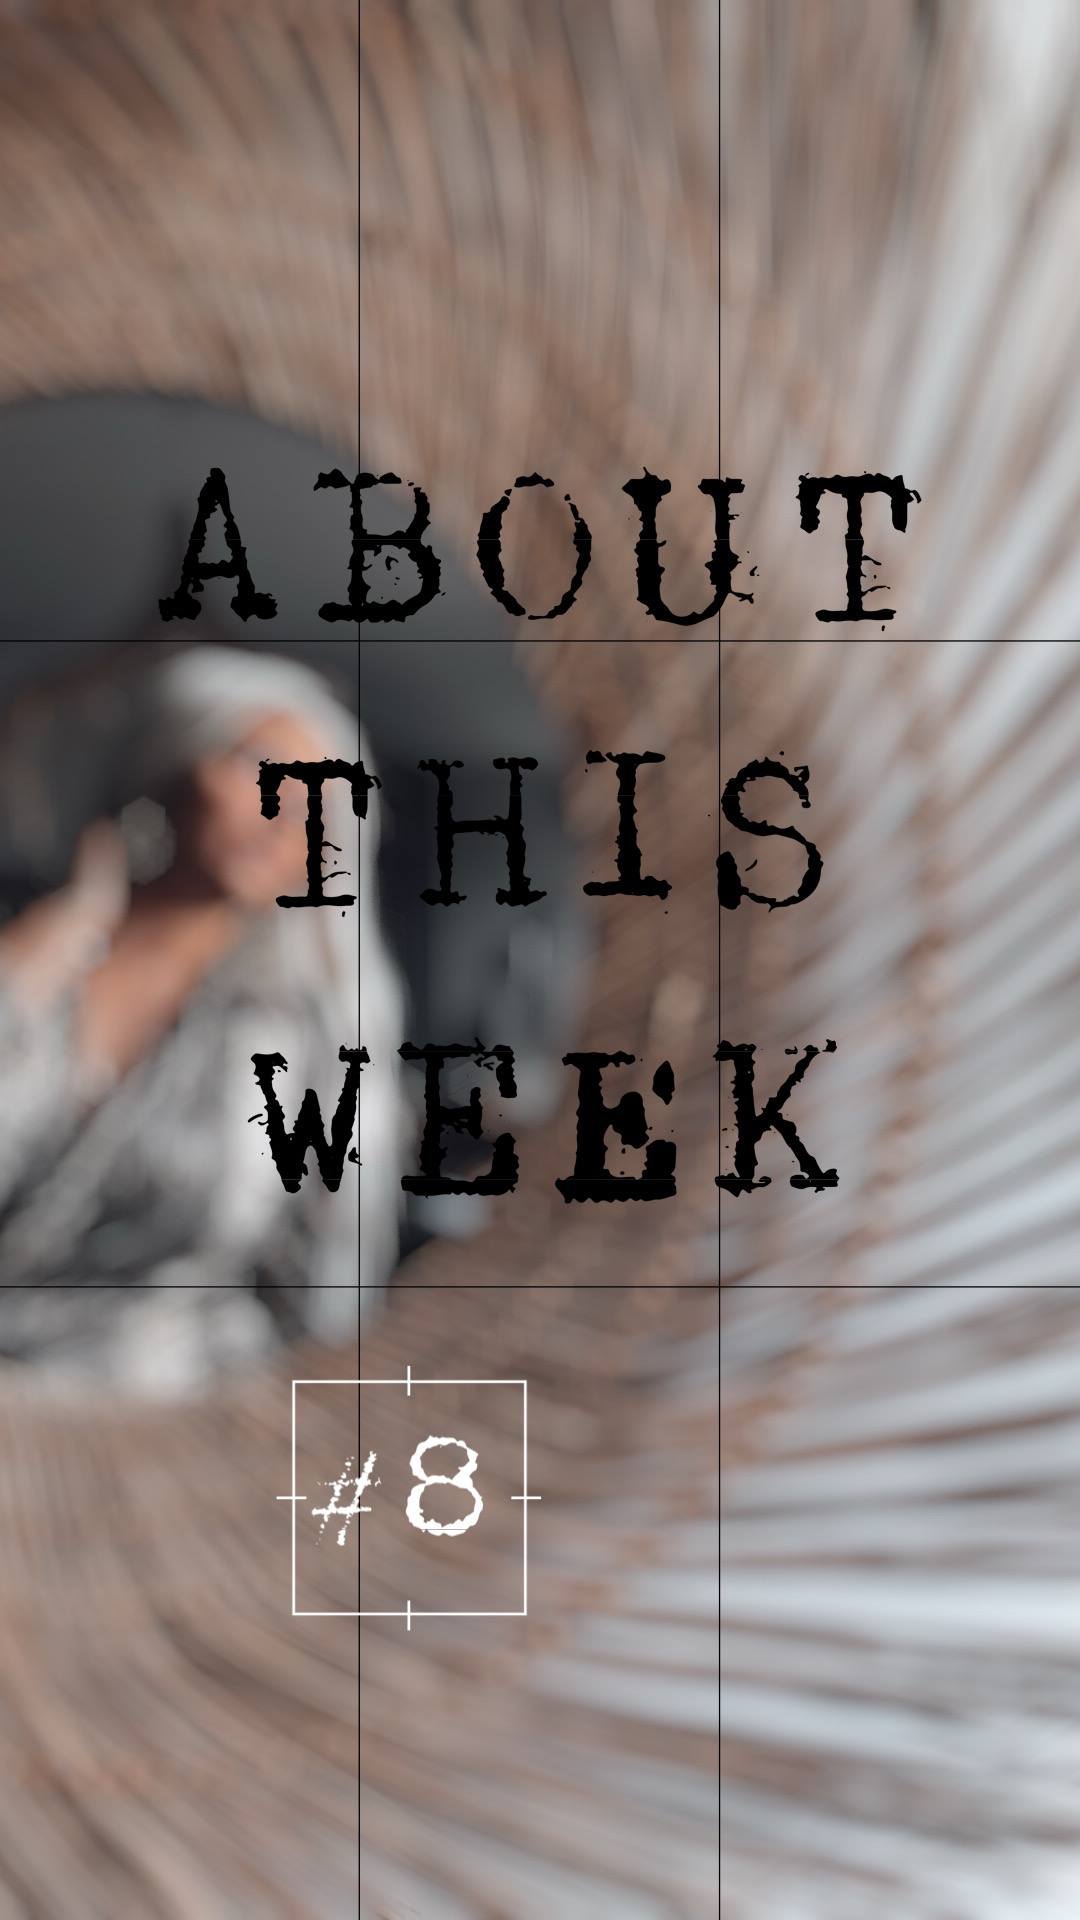 About this week #8